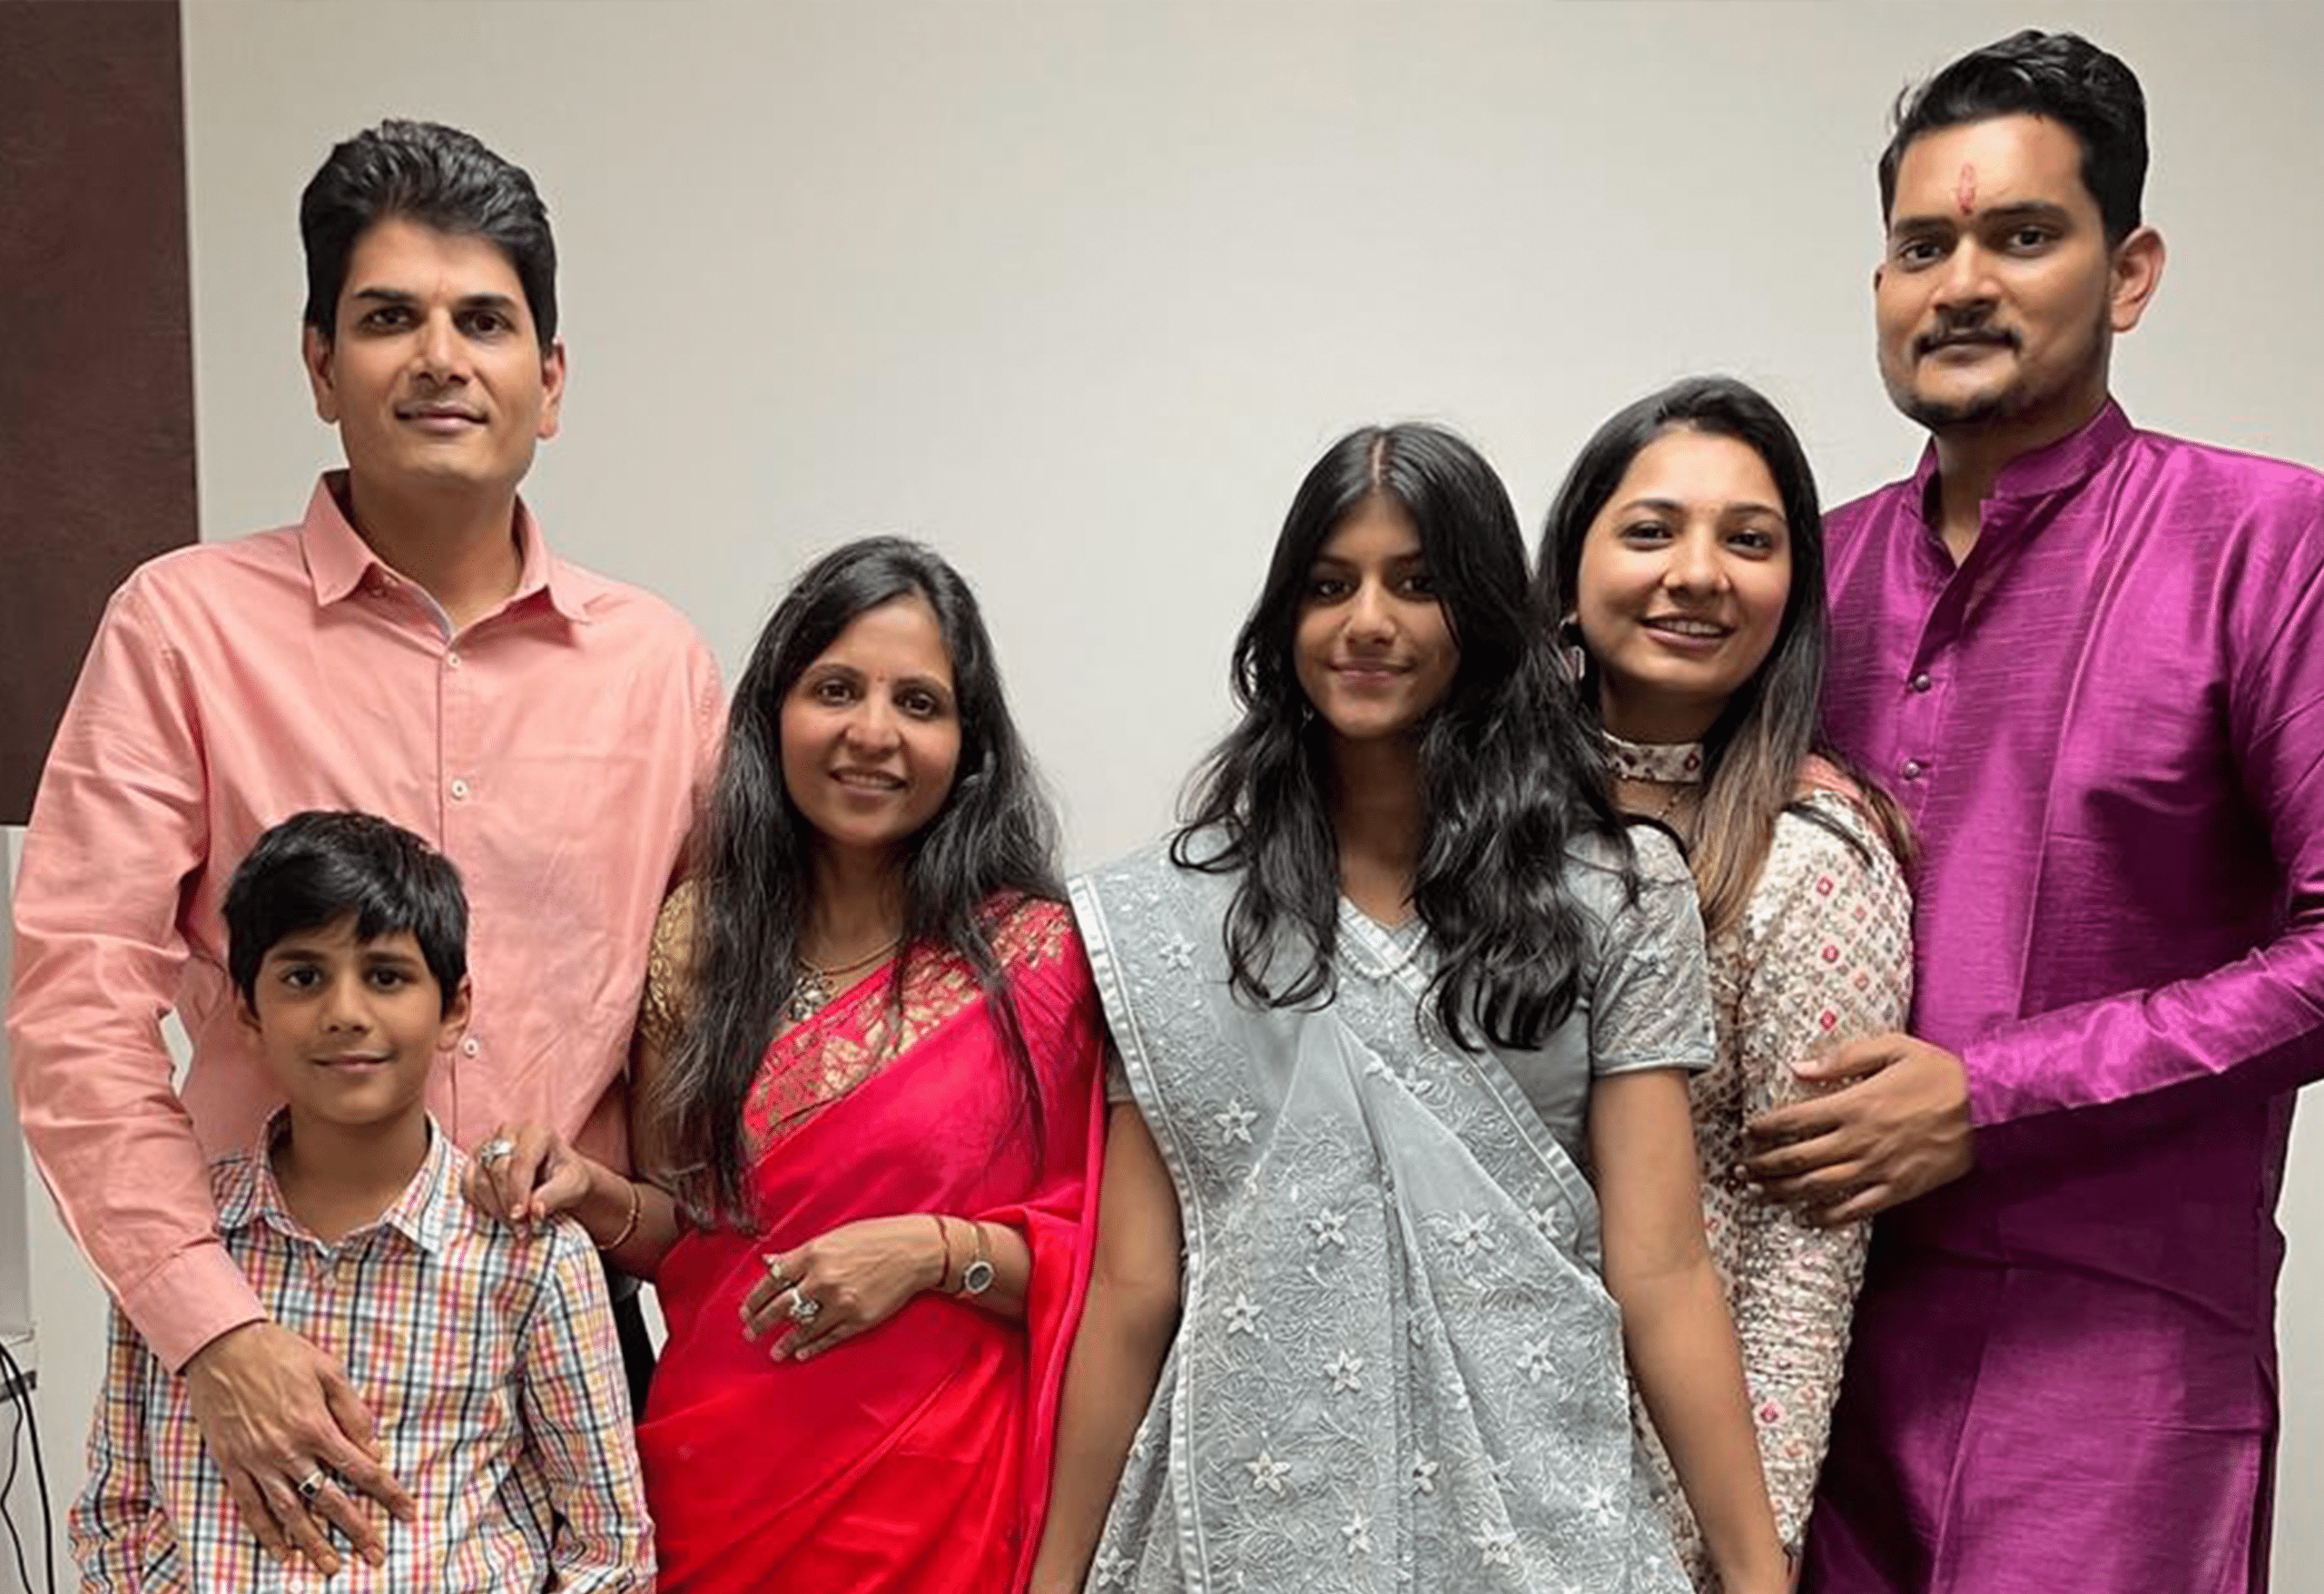 Vivaan and Anusha with her entire family, ready to celebrate Diwali.